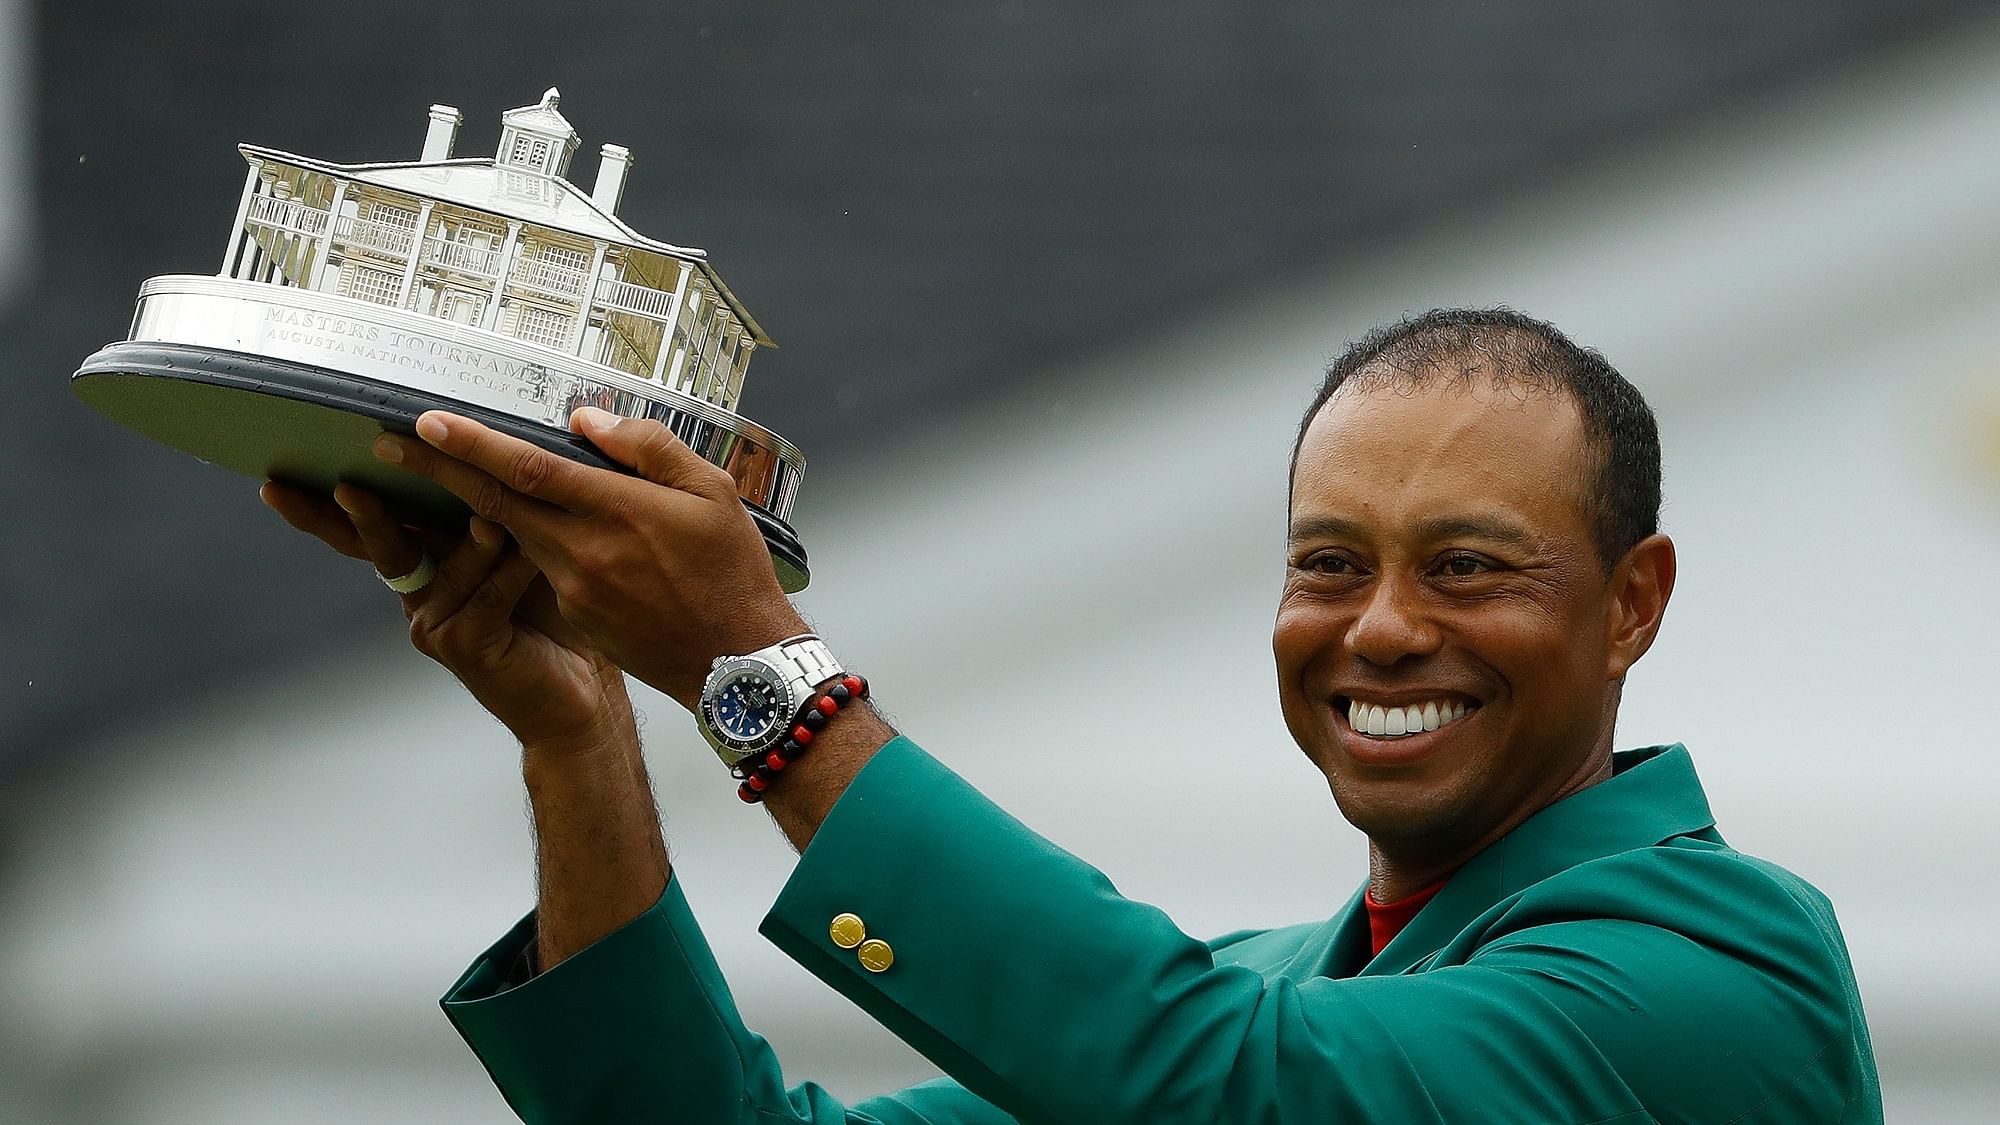 Tiger Woods wears his green jacket holding the winning trophy after the final round for the Masters golf tournament.